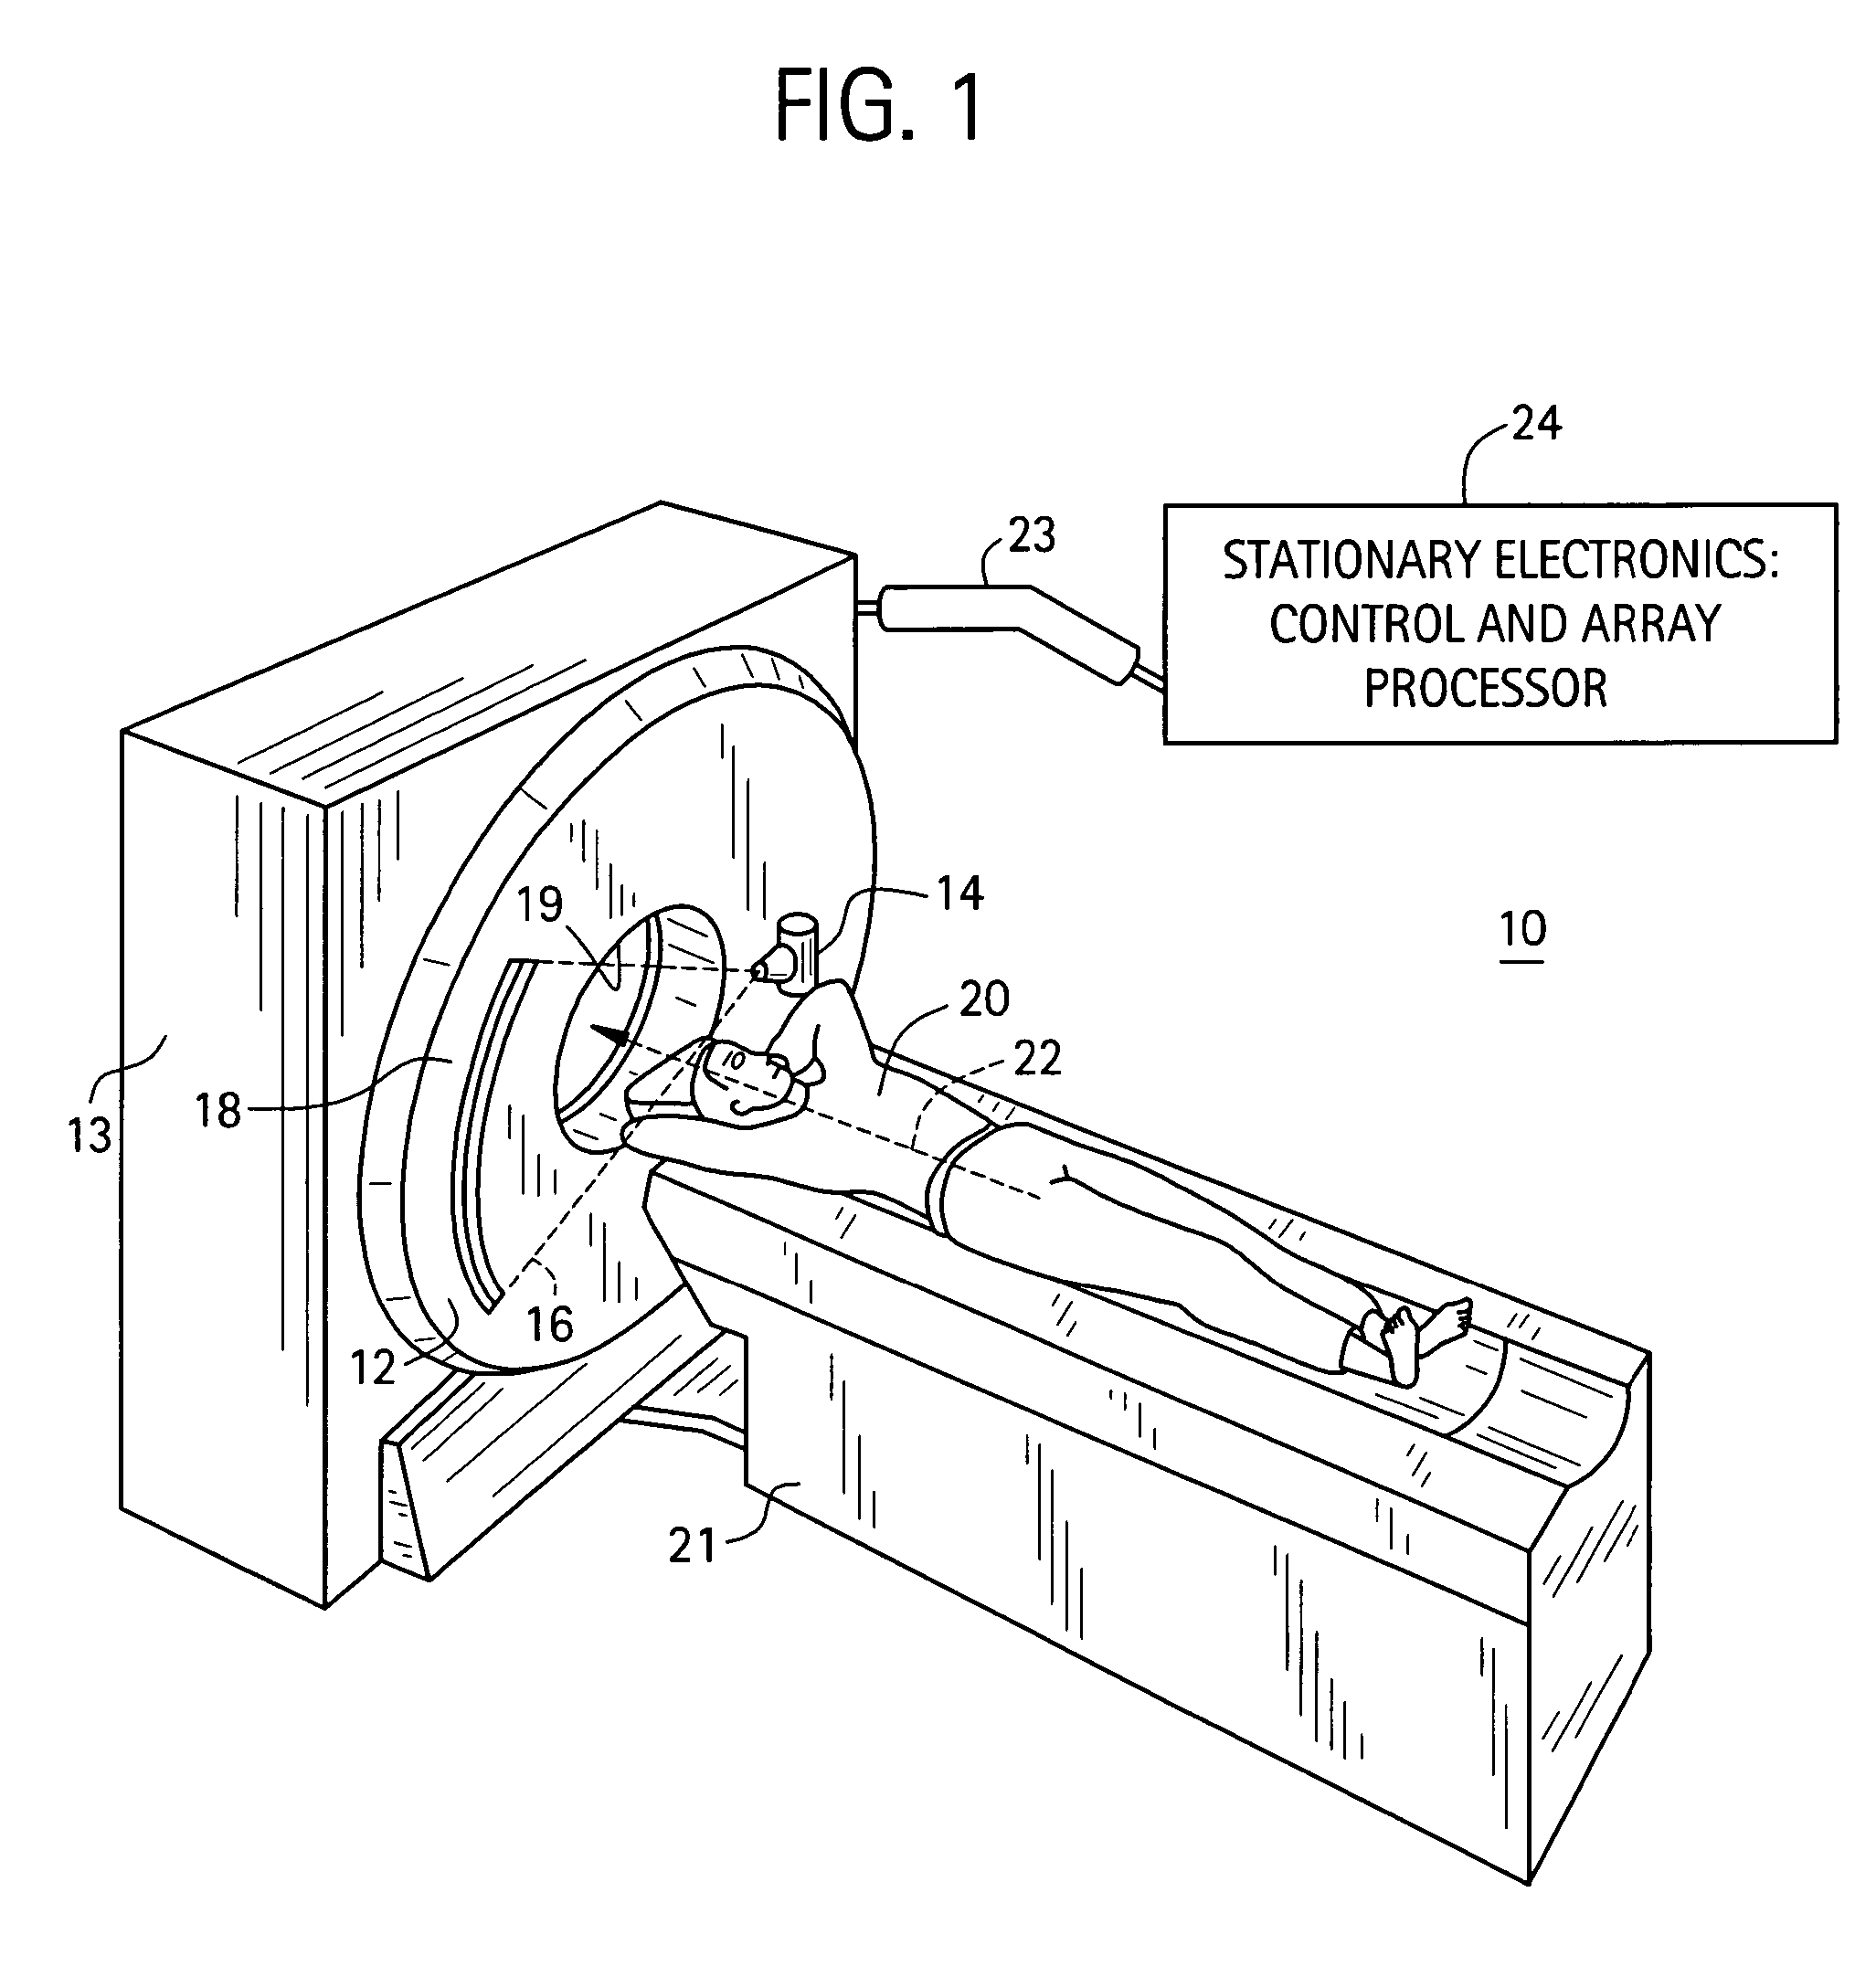 Multichannel contactless power transfer system for a computed tomography system